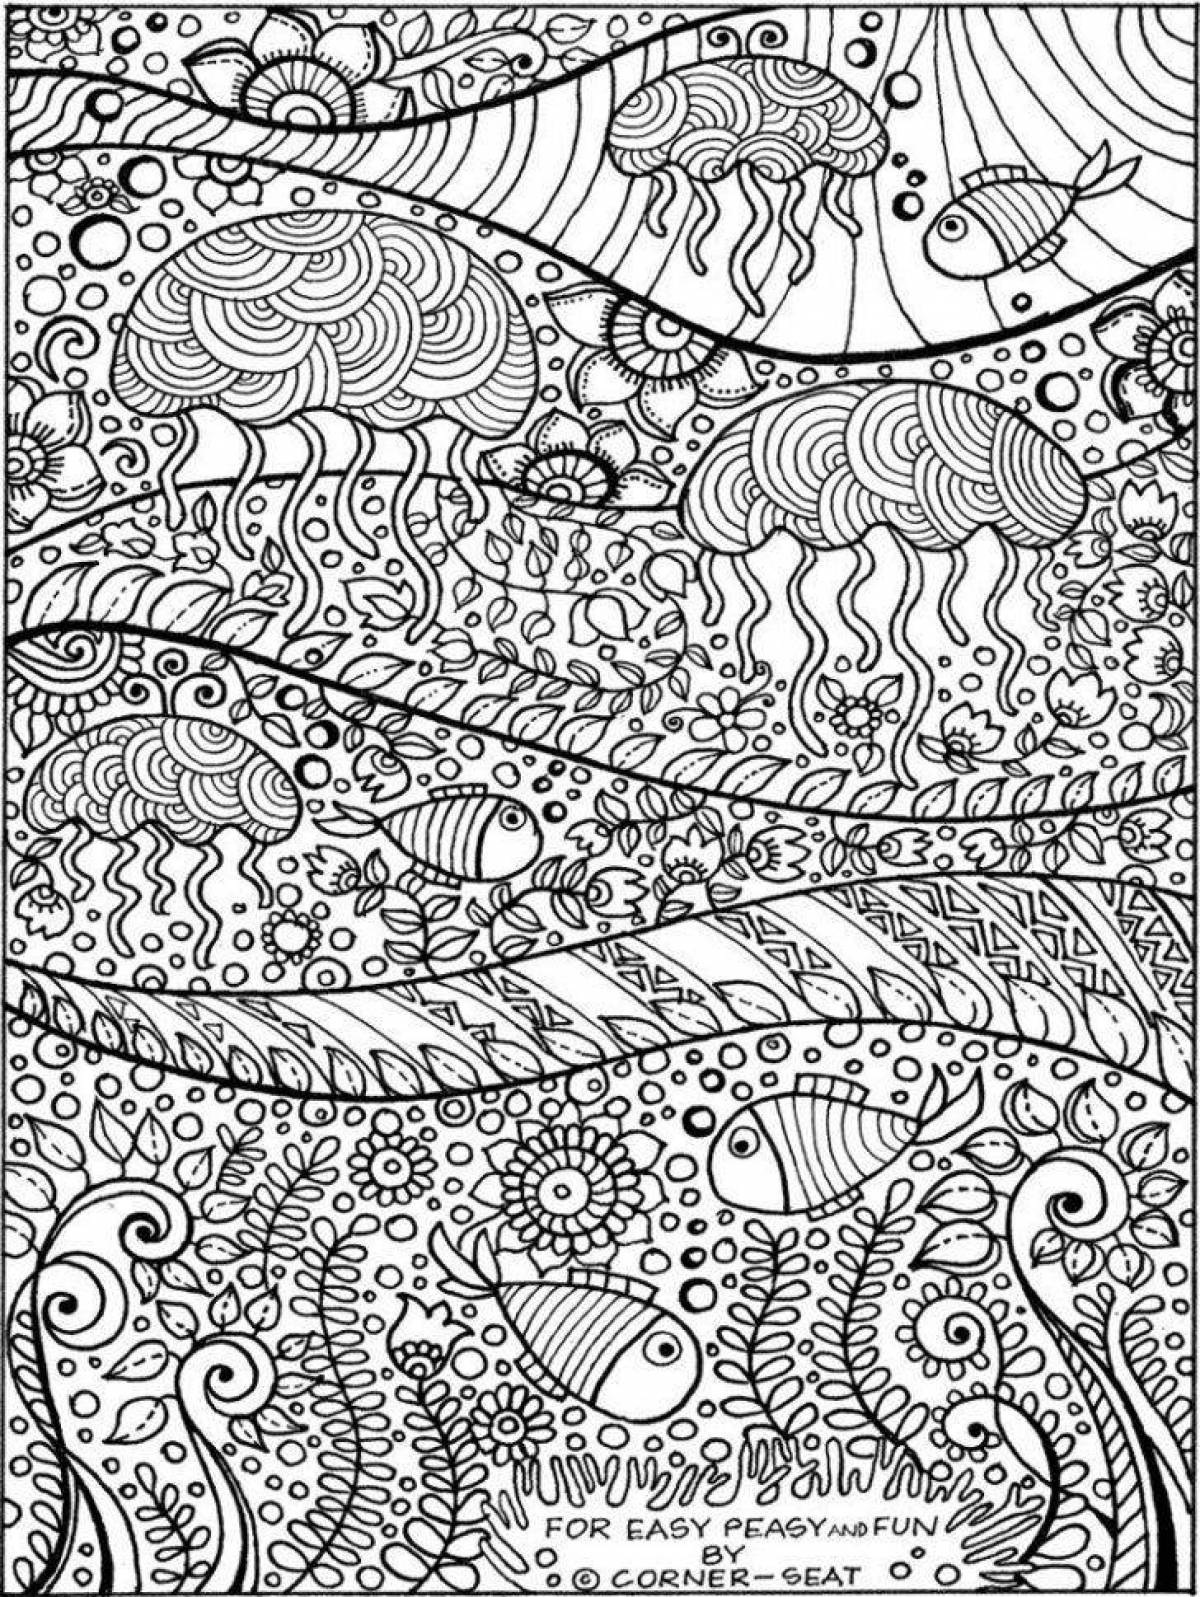 Raised coloring page